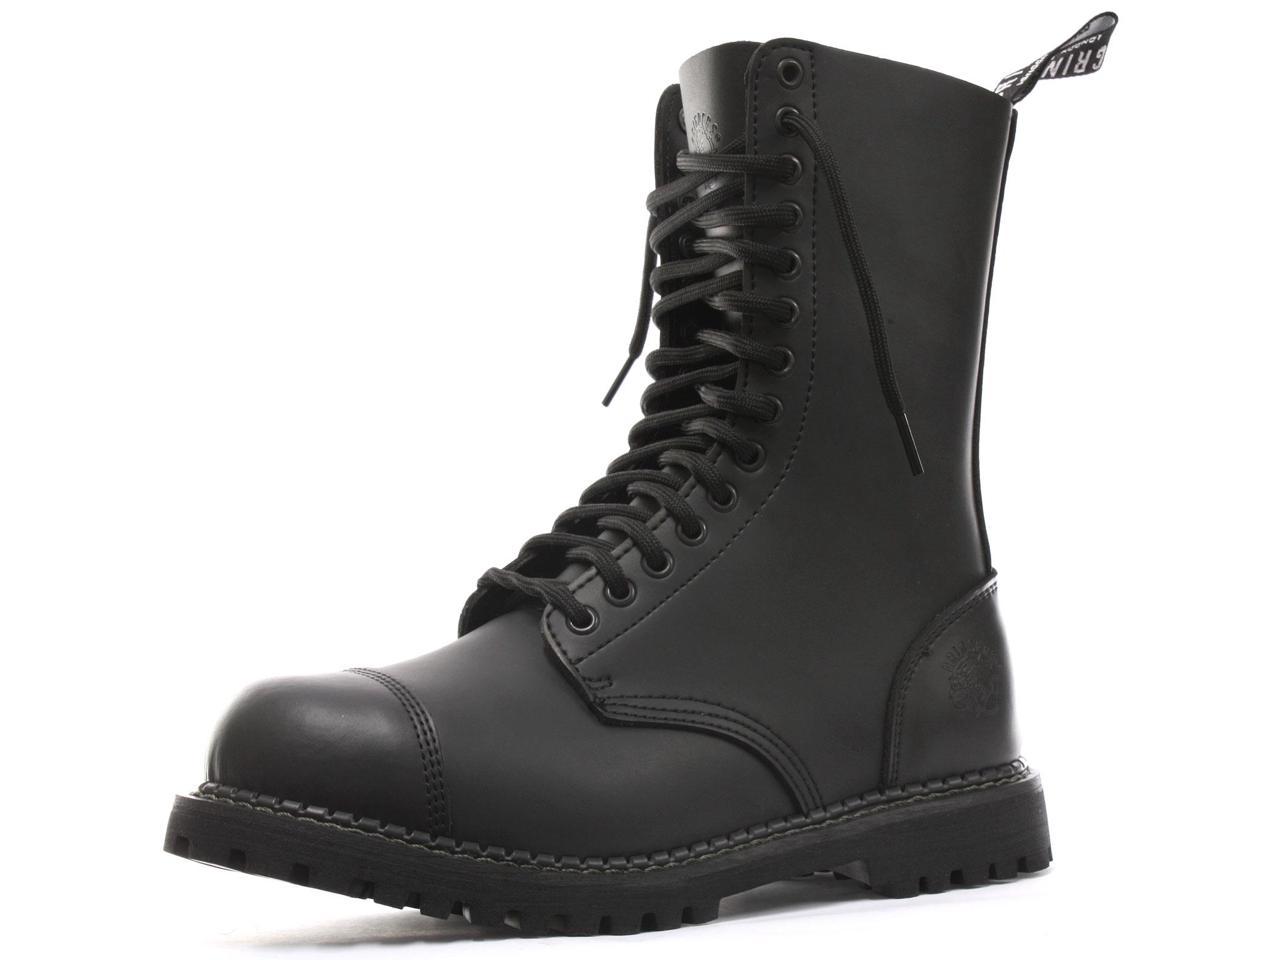 Grinders Stag 2015 Matte Finish Mens Safety Steel Toe Cap Boots